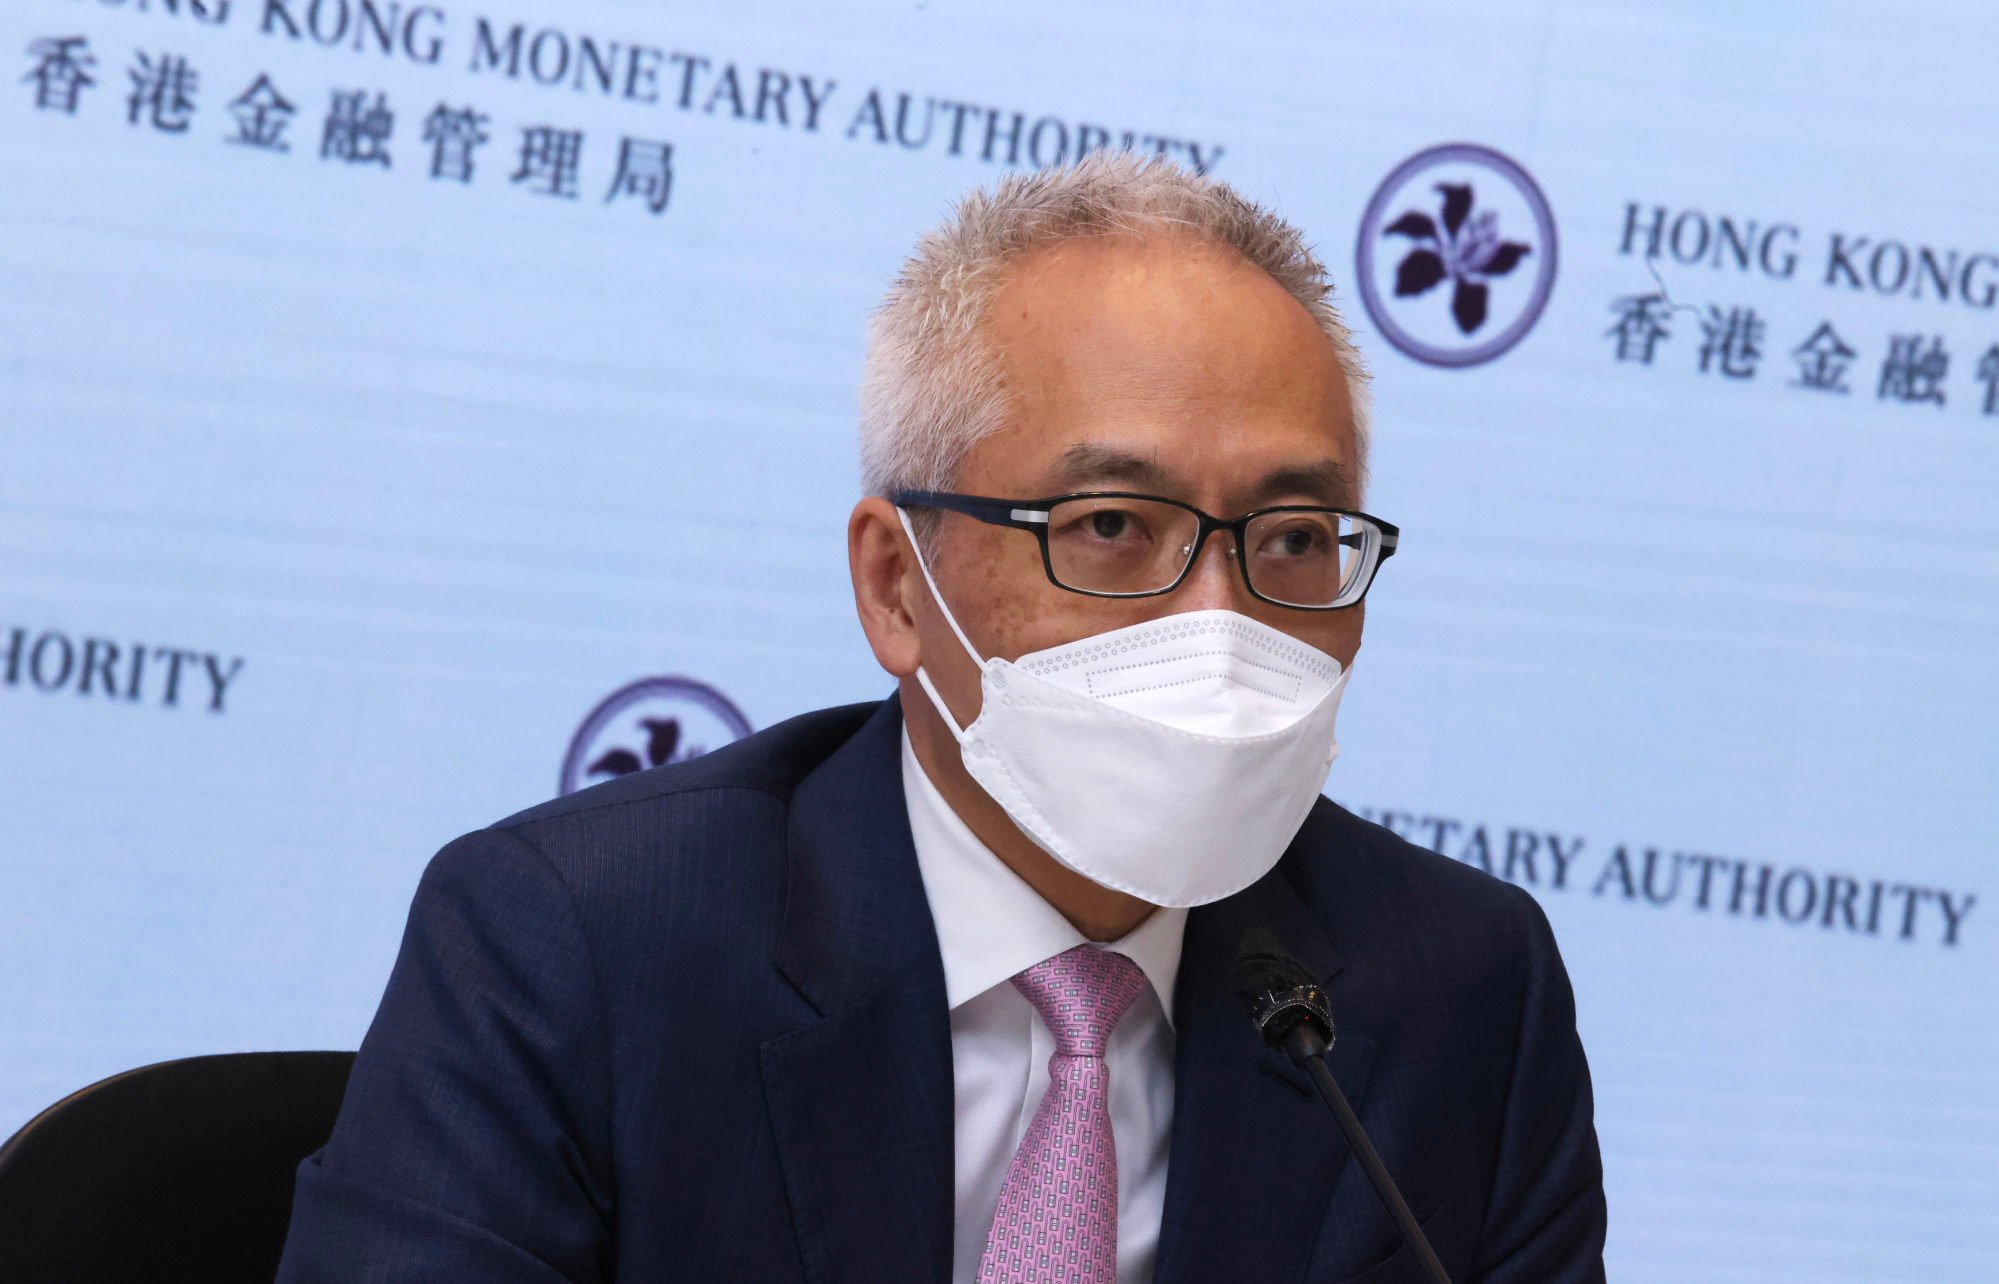 It’s the right time for Hong Kong to consider a centralised digital currency, says Howard Lee, deputy chief executive of the Hong Kong Monetary Authority (HKMA). Photo: Jonathan Wong